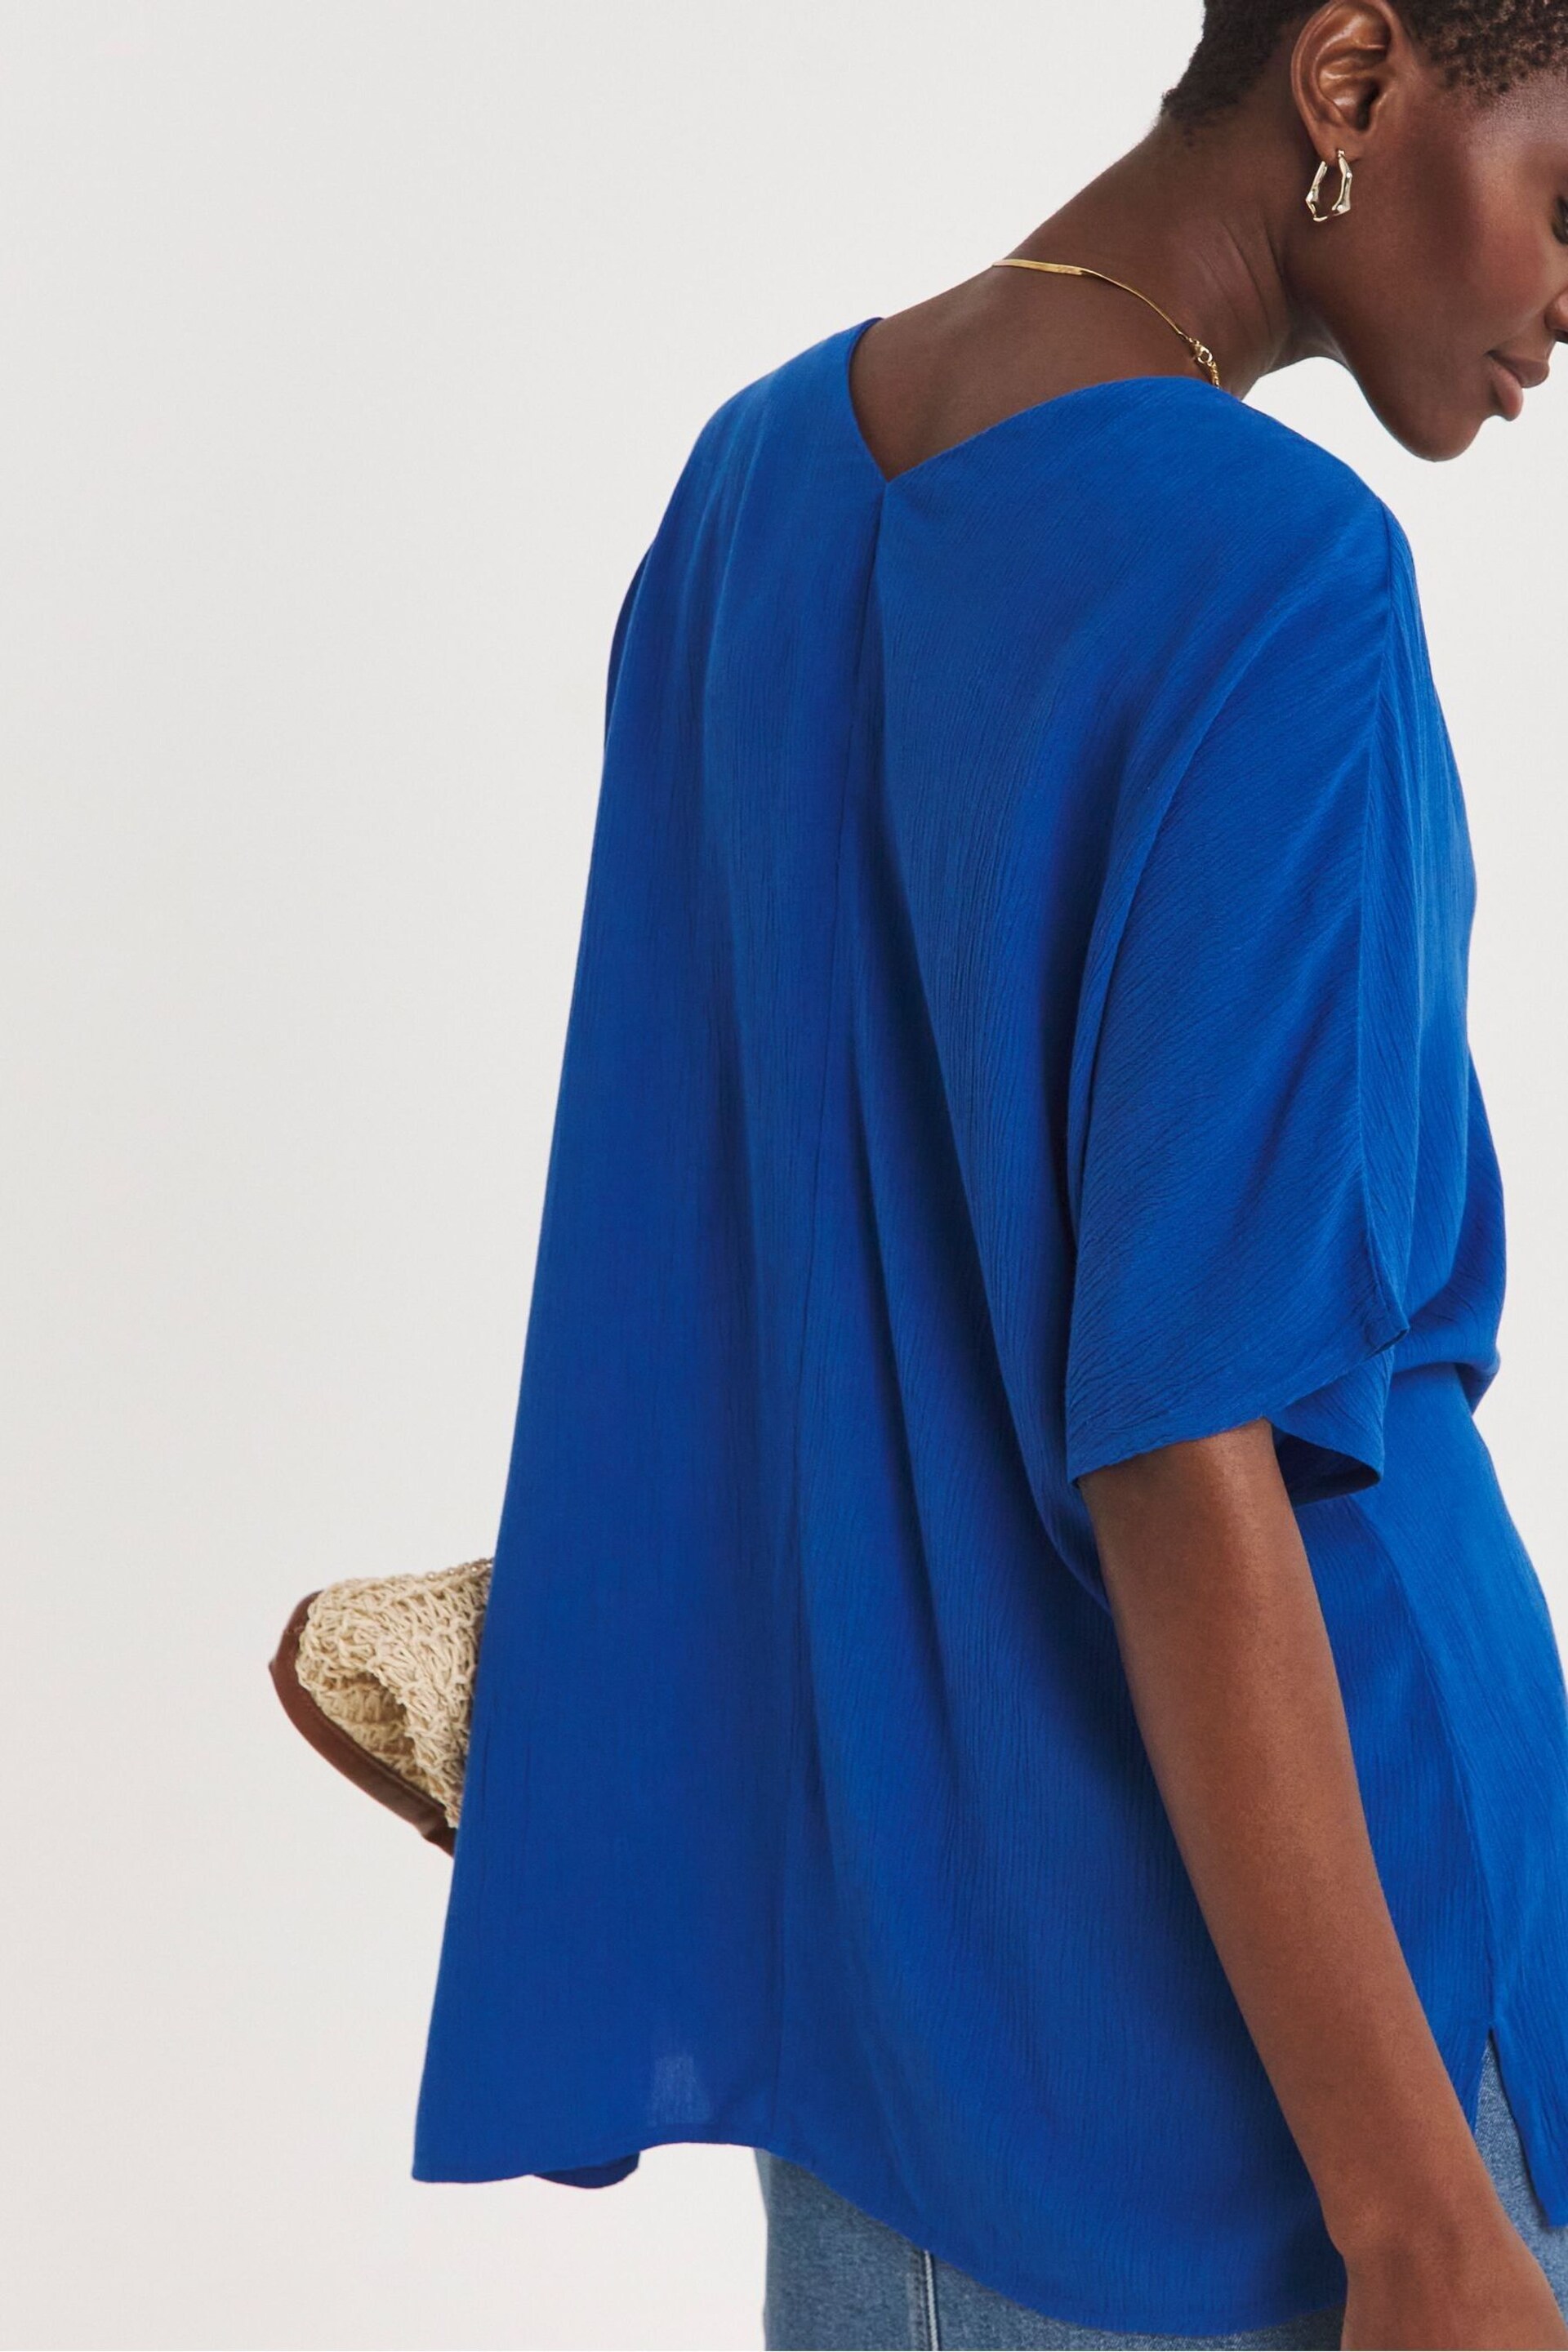 JD Williams Blue Crinkle Tunic Top - Image 2 of 4